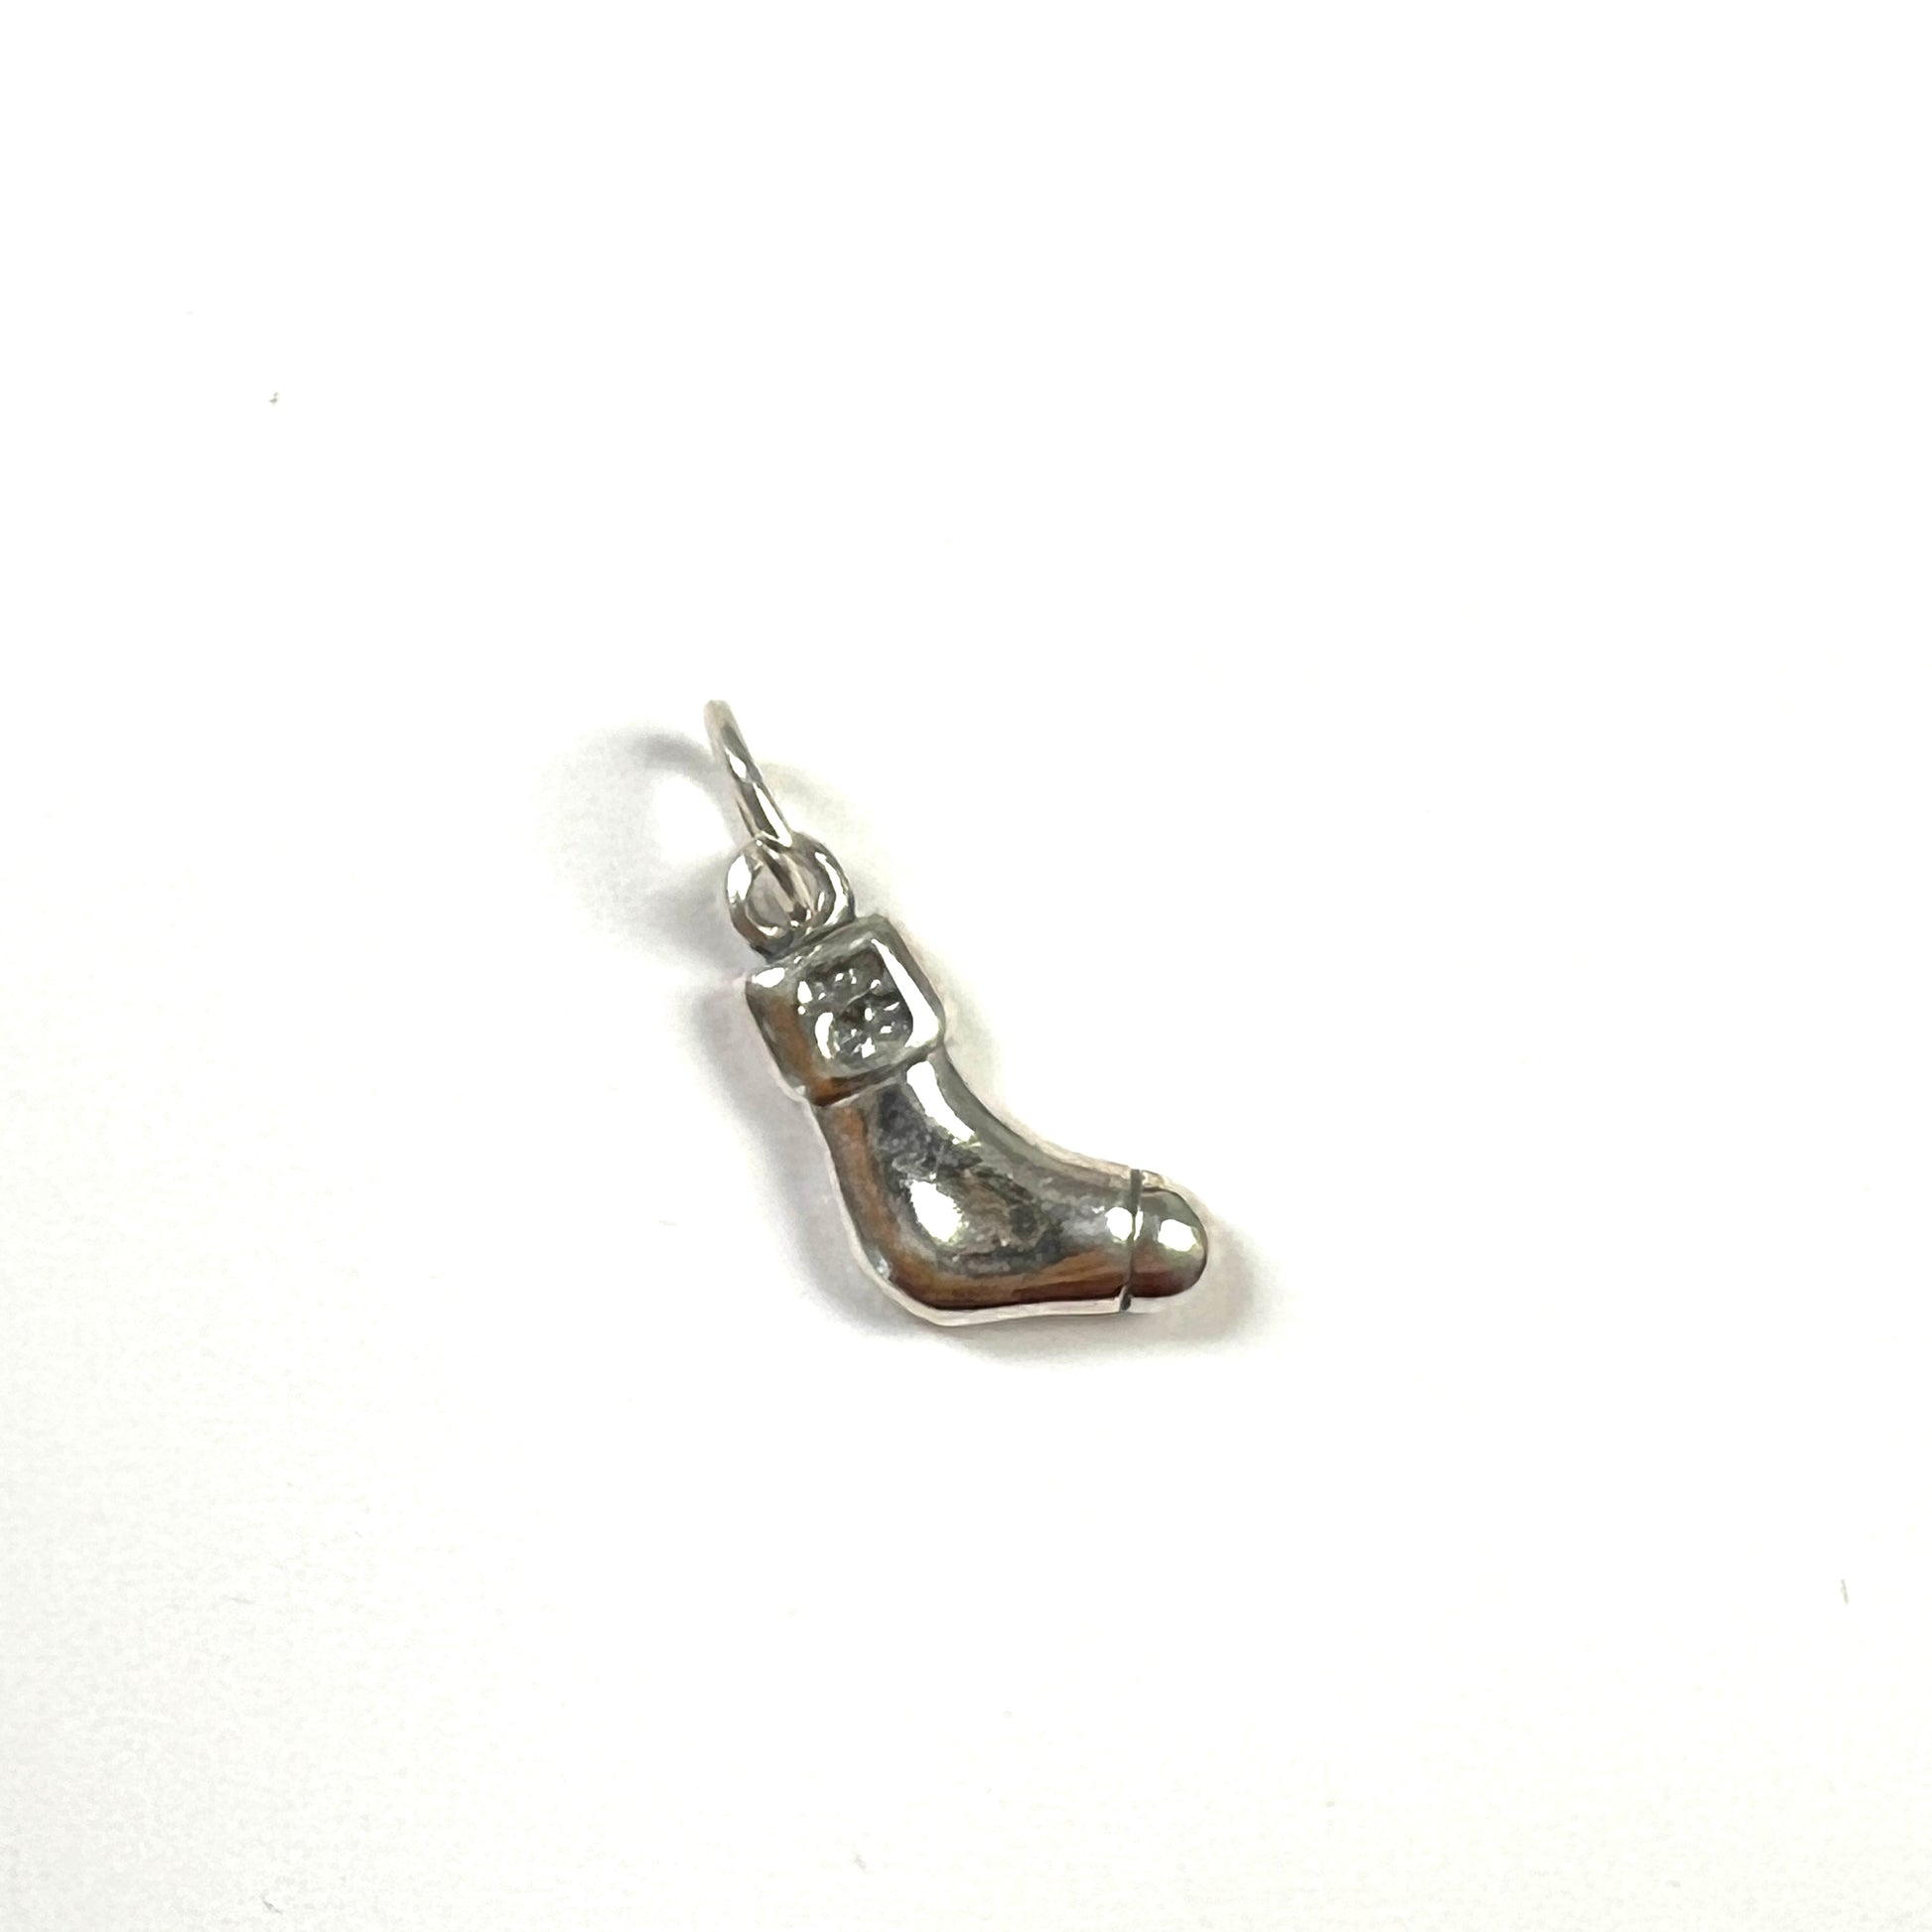 Stocking Sterling Silver Charm - 1 pc.